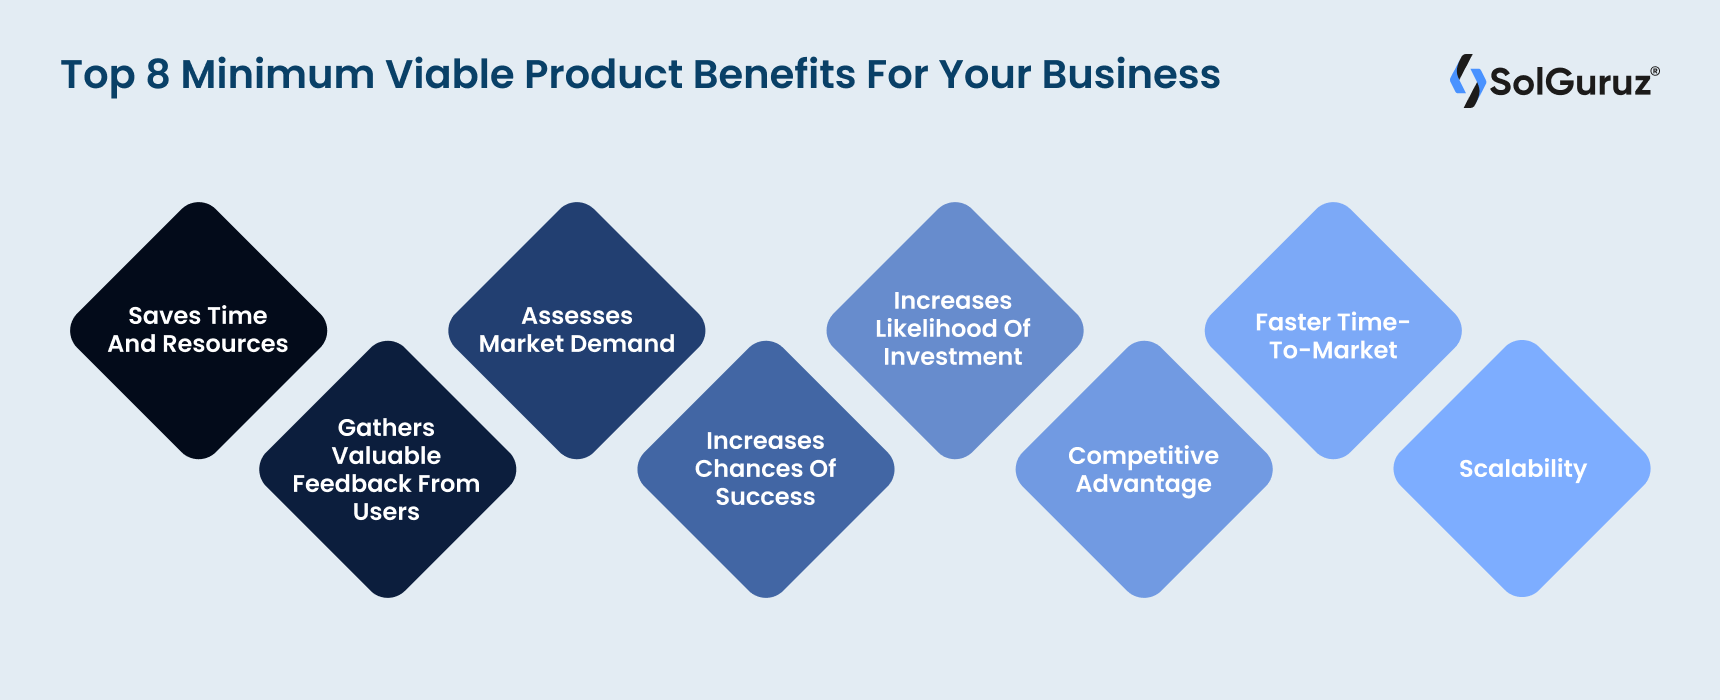 Top 8 Minimum Viable Product Benefits For Your Business